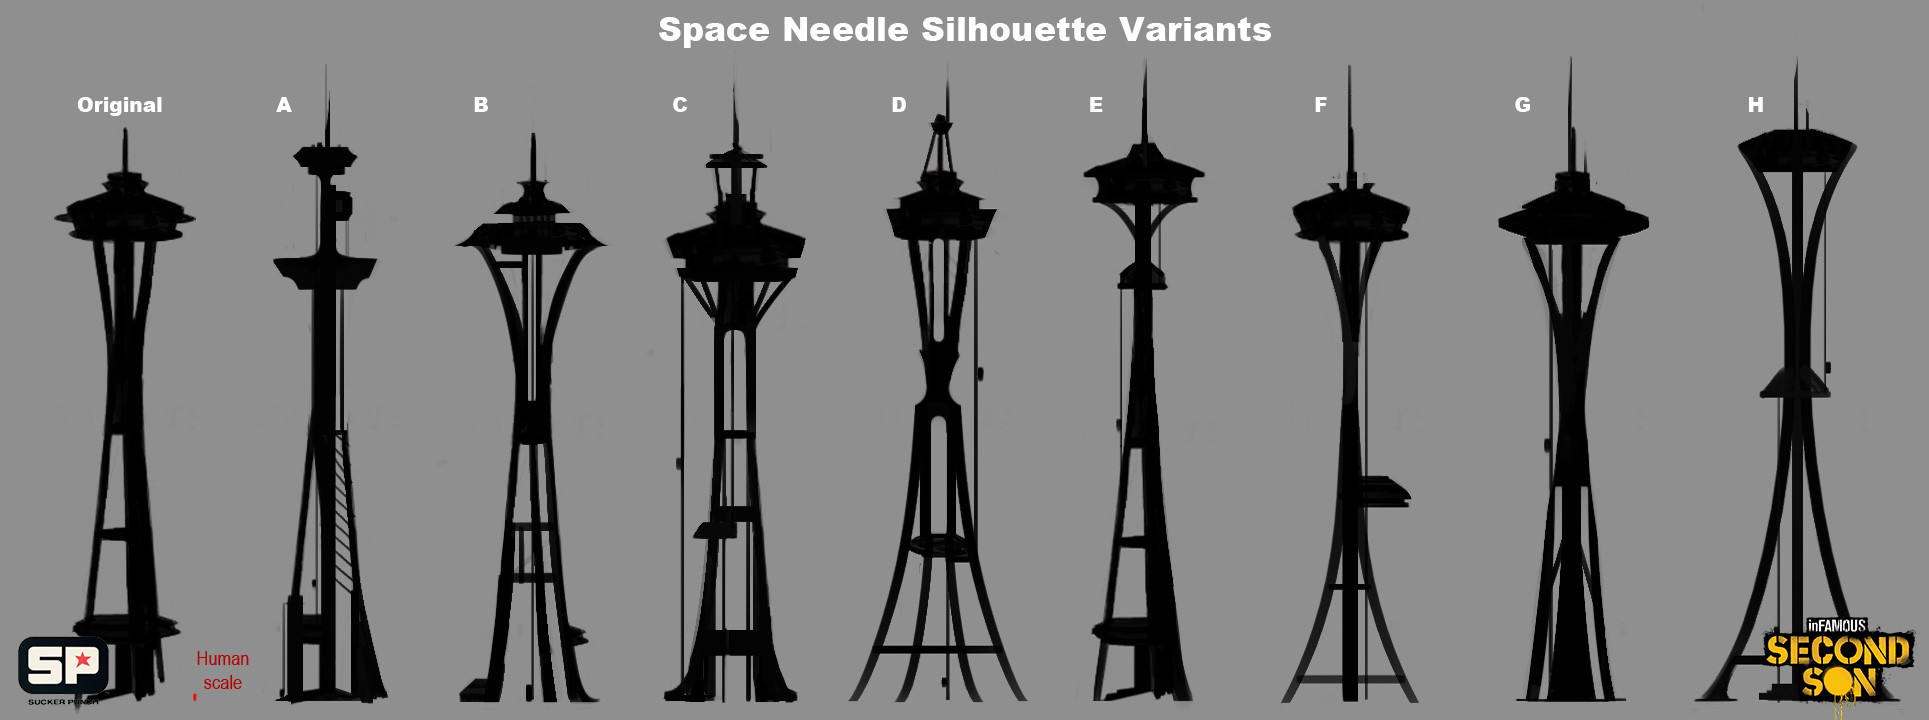 Playing with stylized Seattle Space Needle